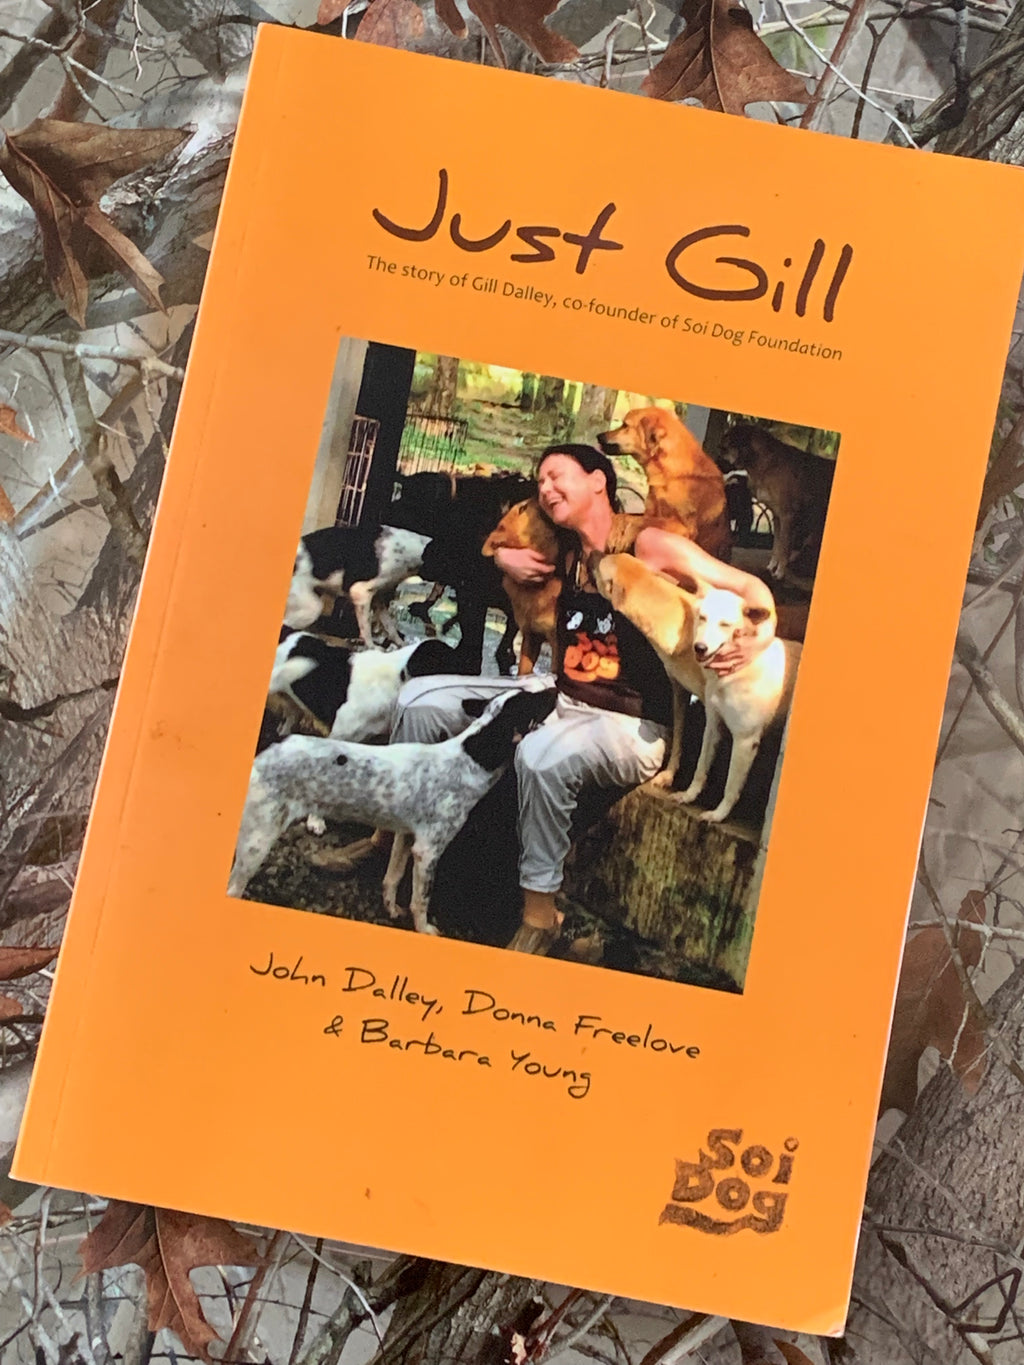 Just Gill: The Story of Gill Dalley, Co-Founder of Soi Dog Foundation- By John Dalley, Donna Freelove, and Barbara Young